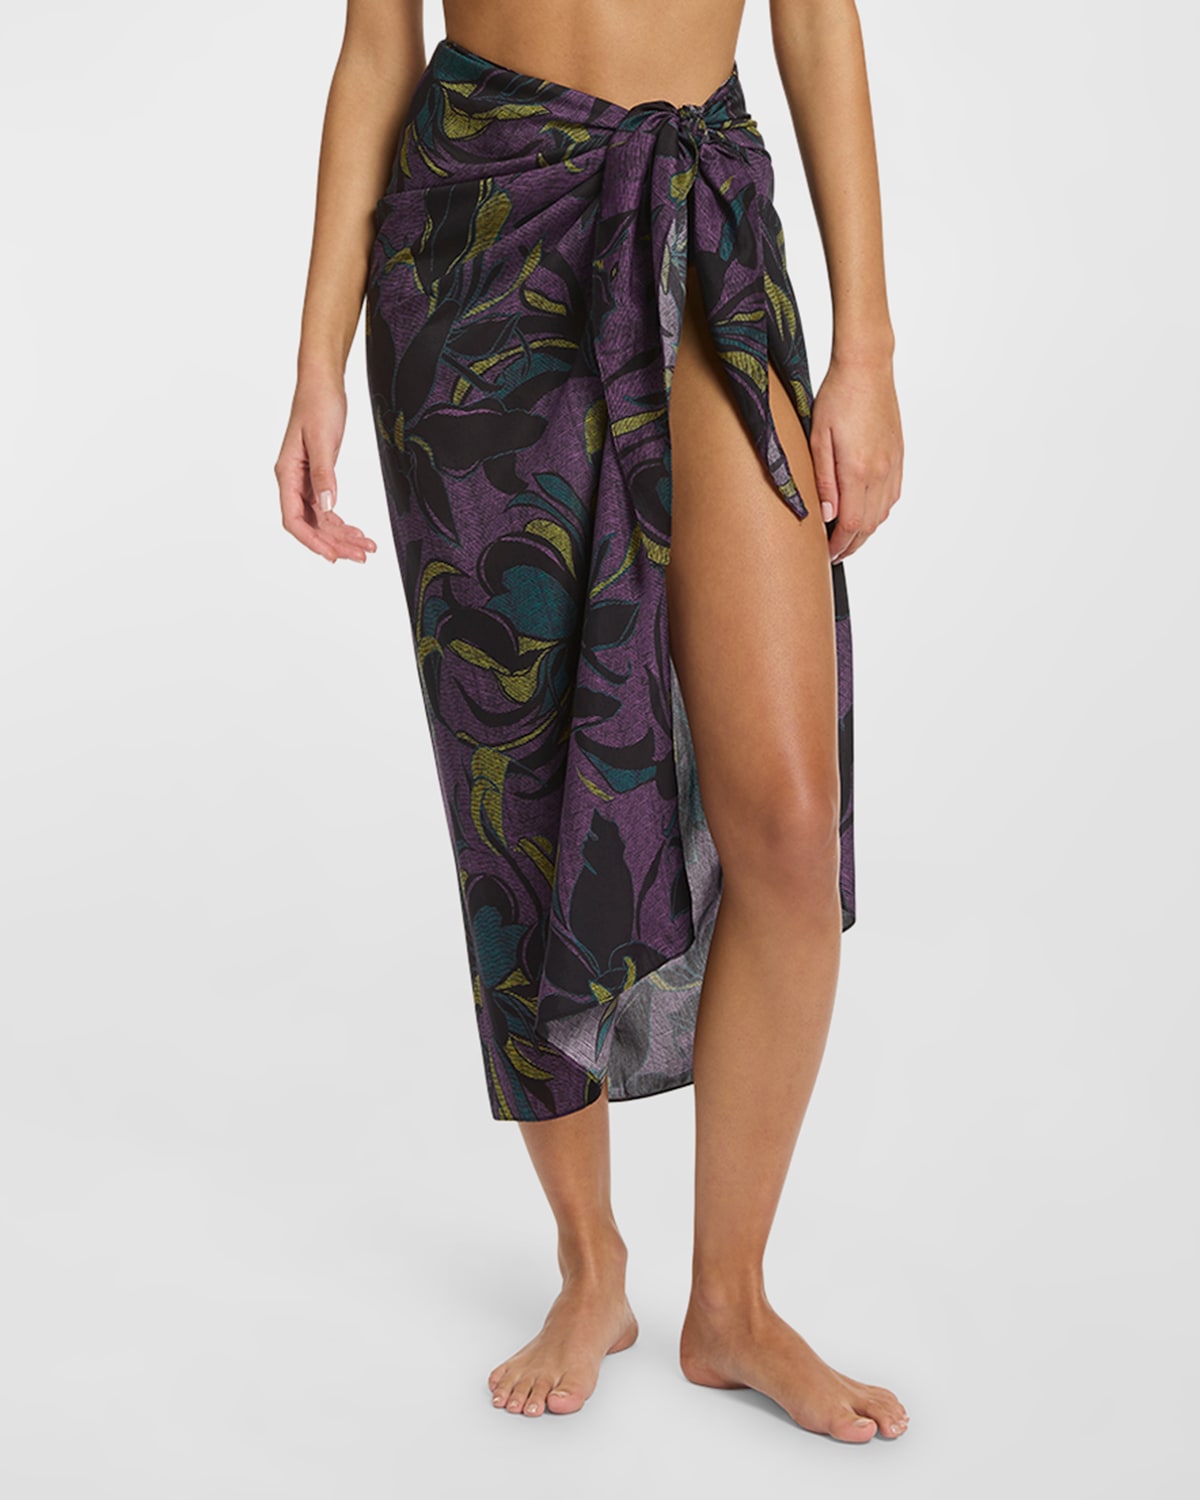 Jets Australia Printed Sarong Coverup In Amethyst